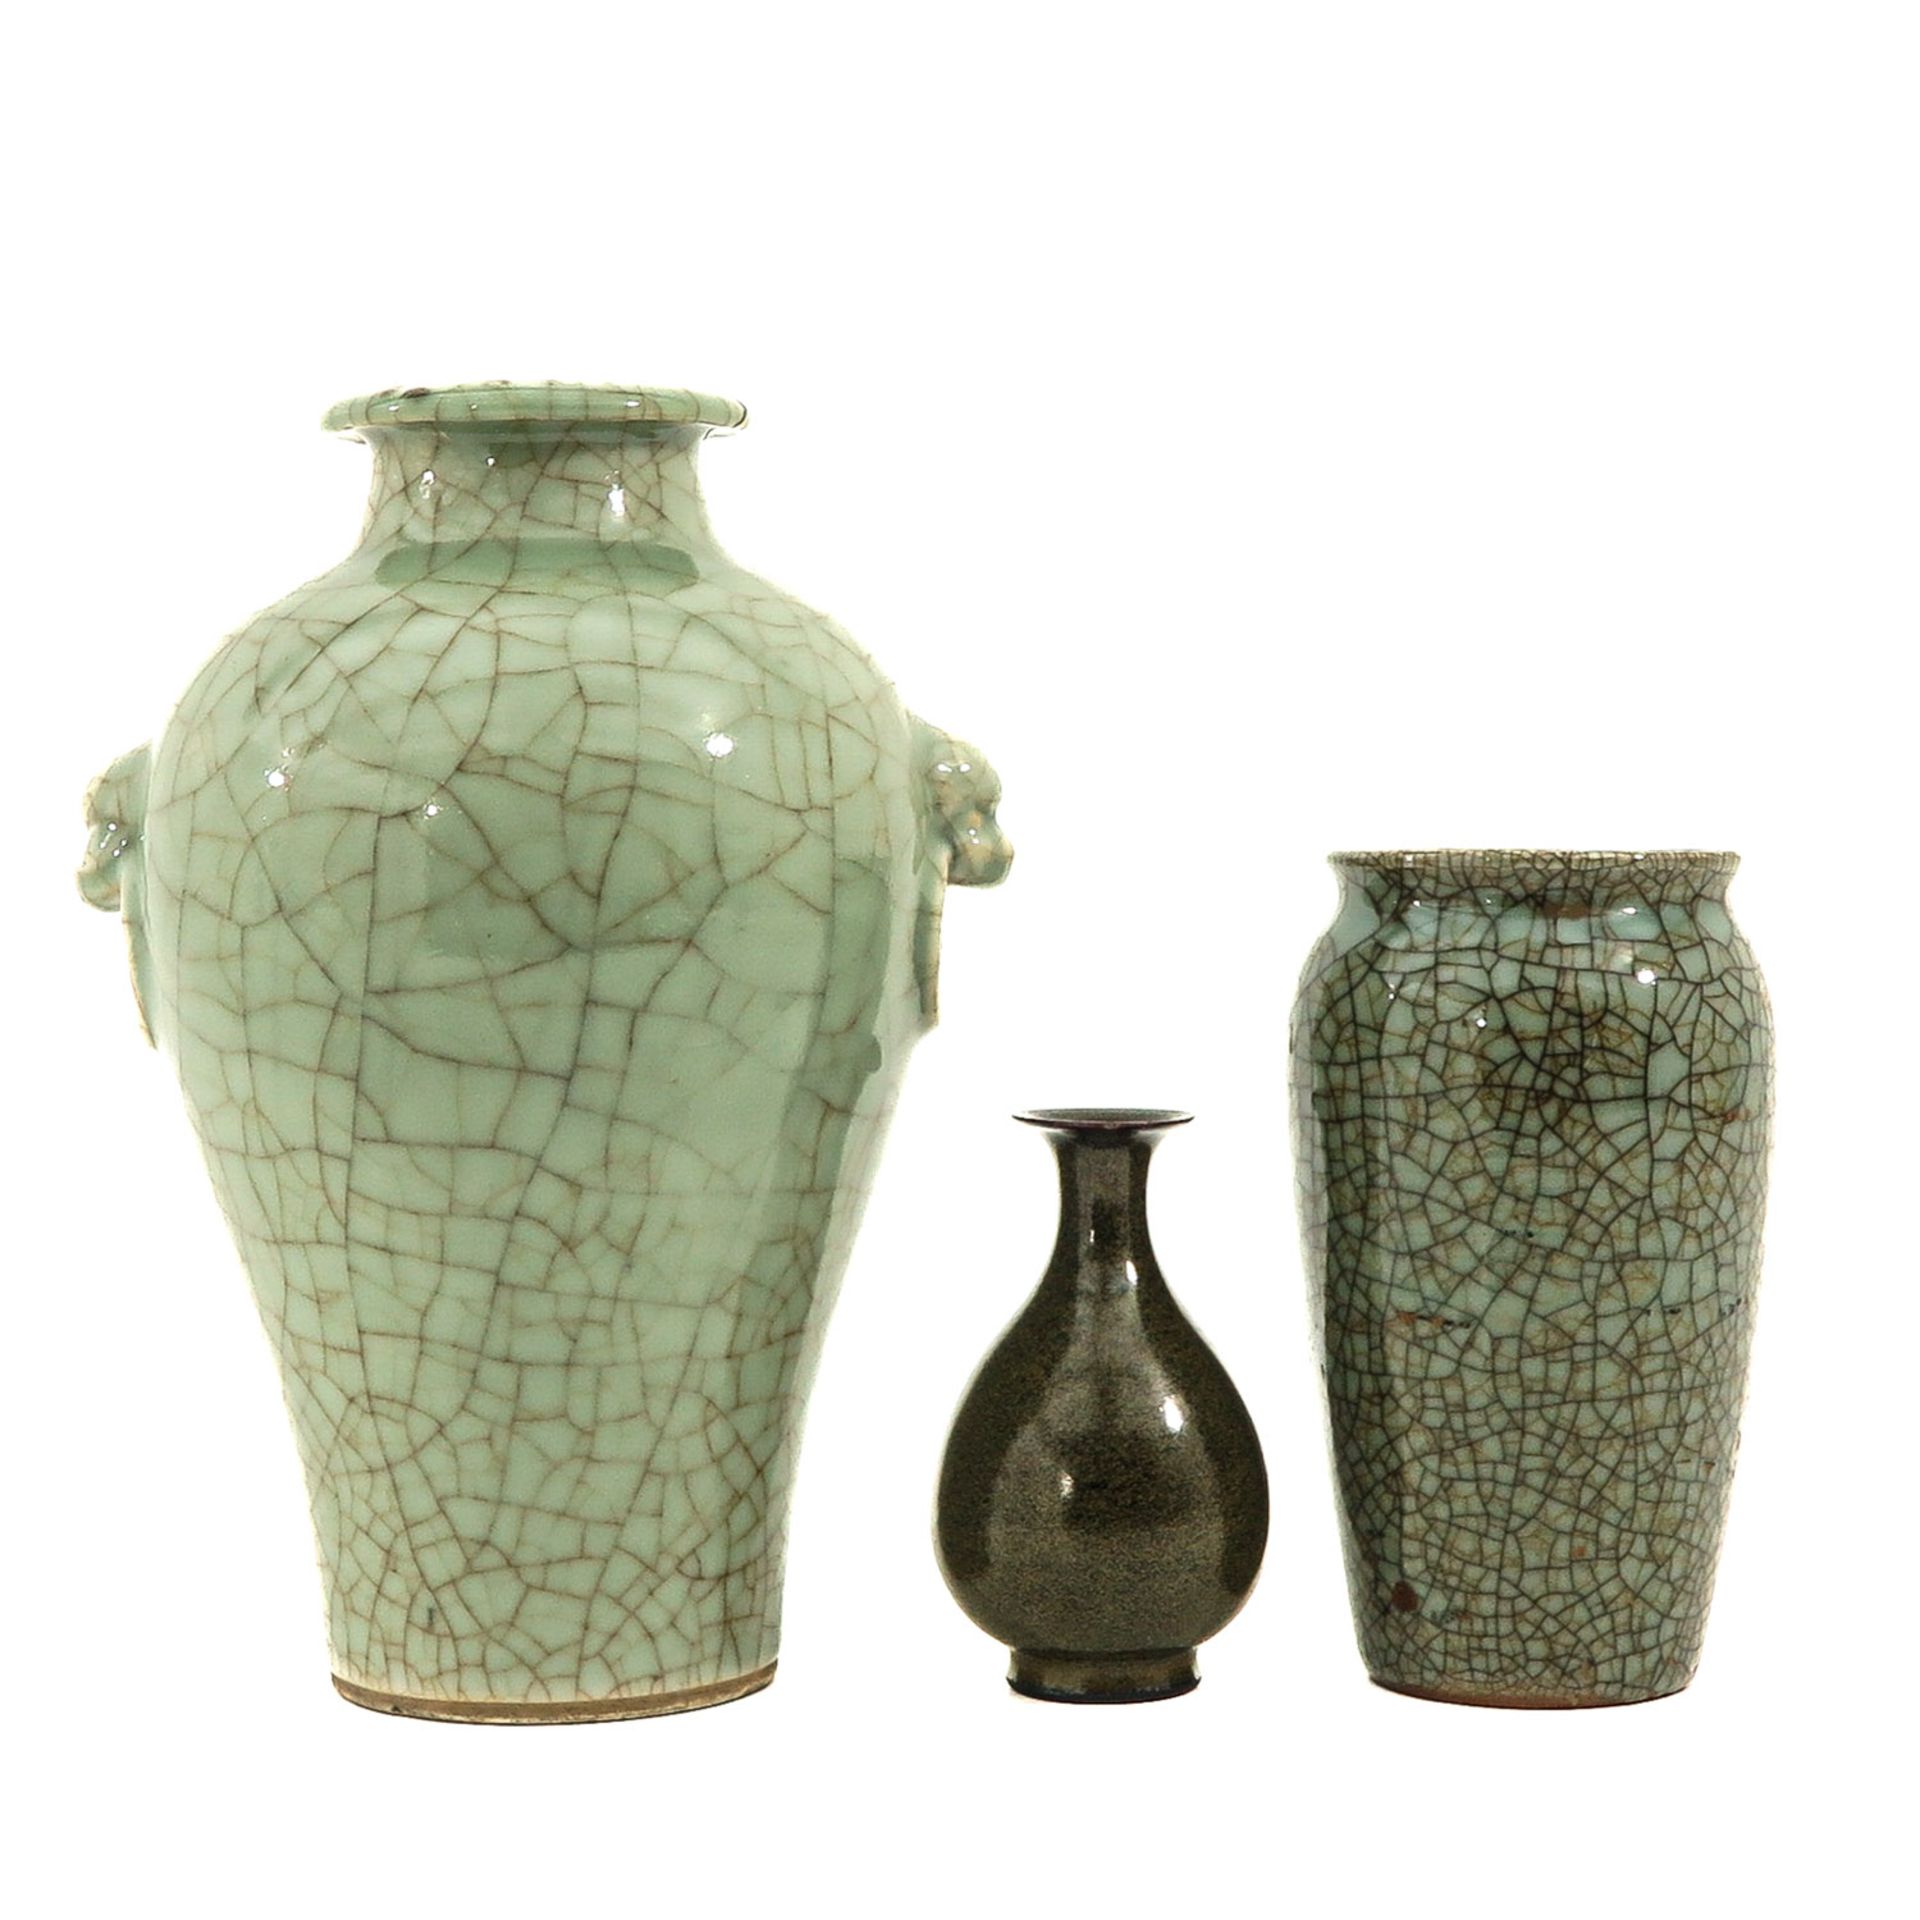 A Collection of 3 Vases - Image 3 of 10